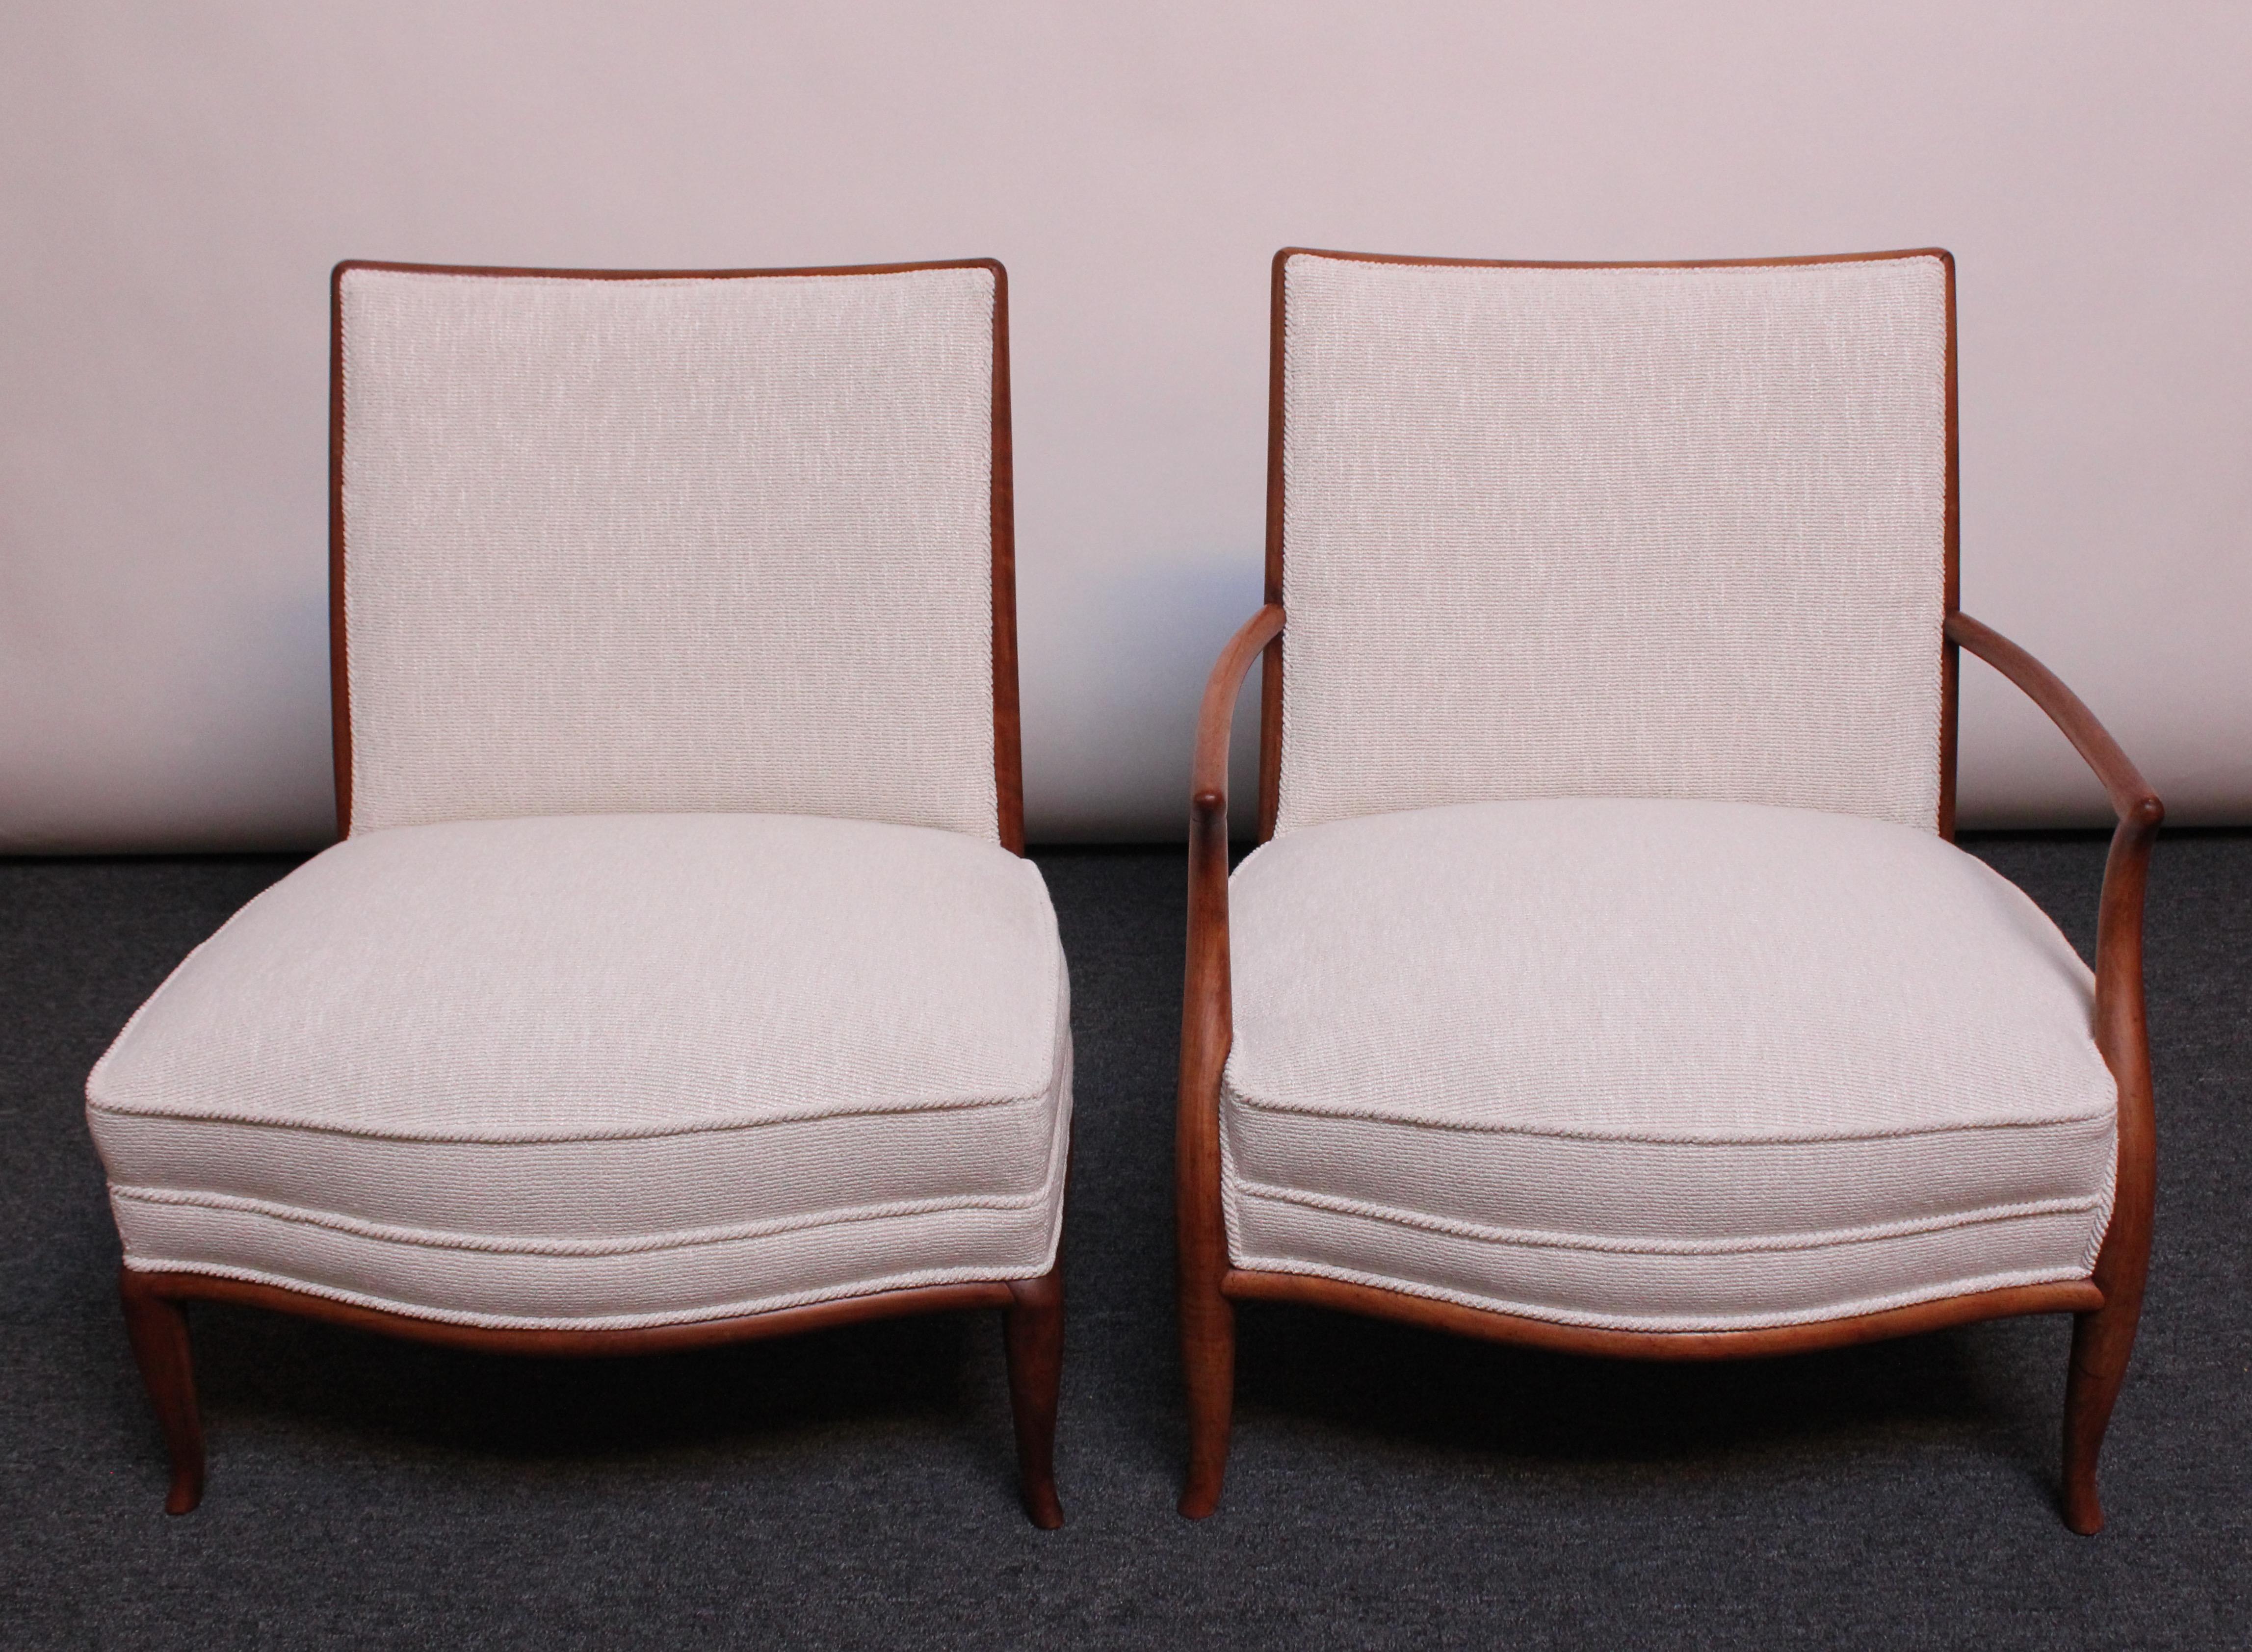 Set of two chairs by T.H. Robsjohn-Gibbings for Widdicomb: The